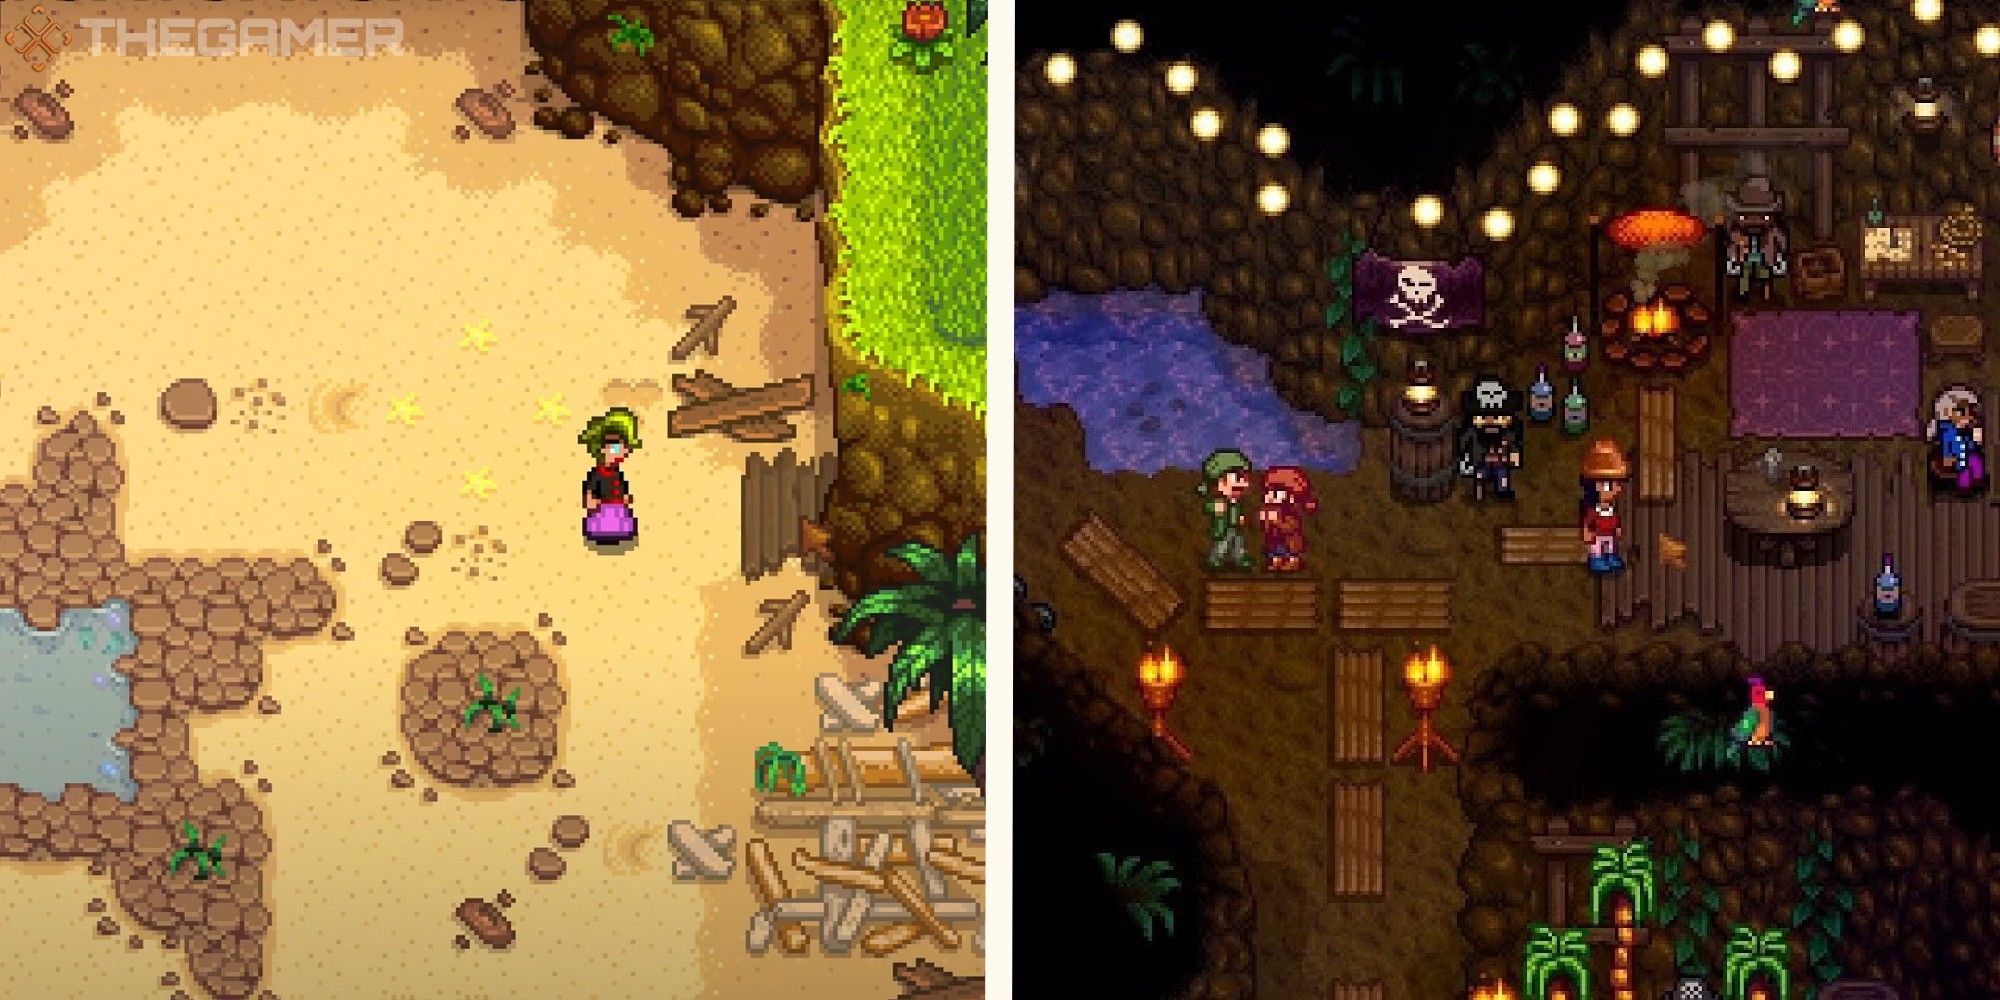 image of player outside of pirates cove next to image of player inside the cove with the pirates